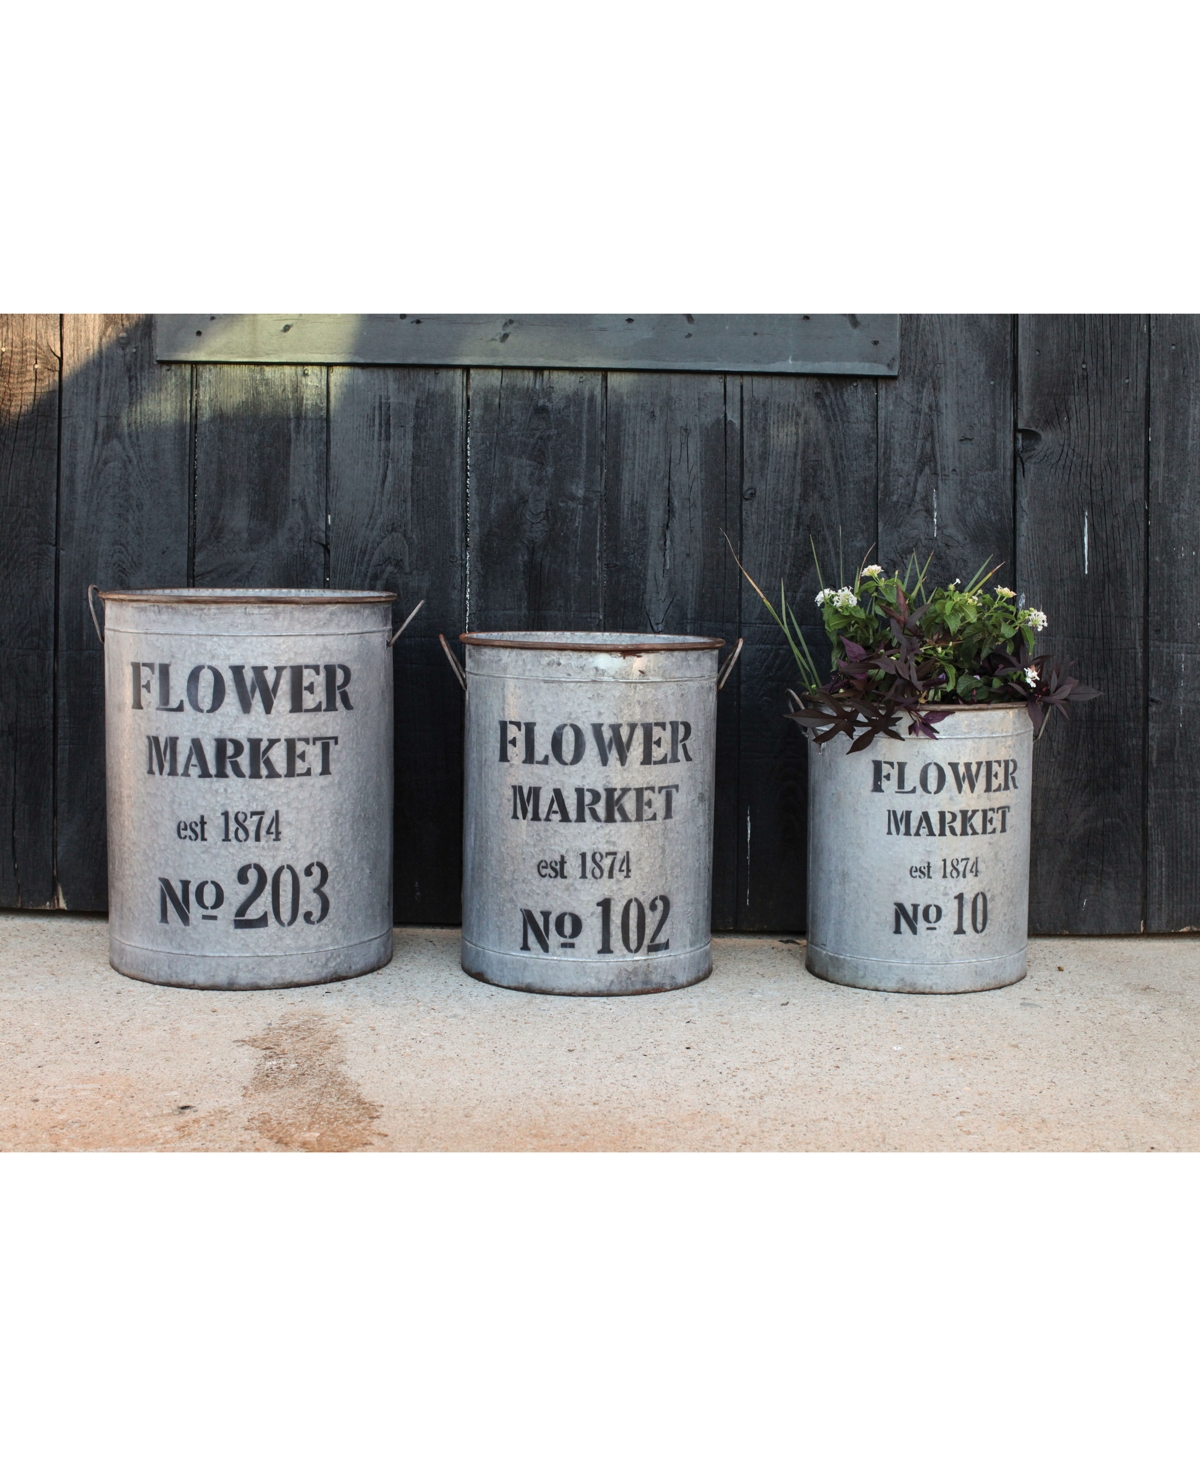 Decorative Round Metal Buckets with Handles and "Flower Market" Text, Distressed Silver, Set of 3 Sizes - Distressed Gray